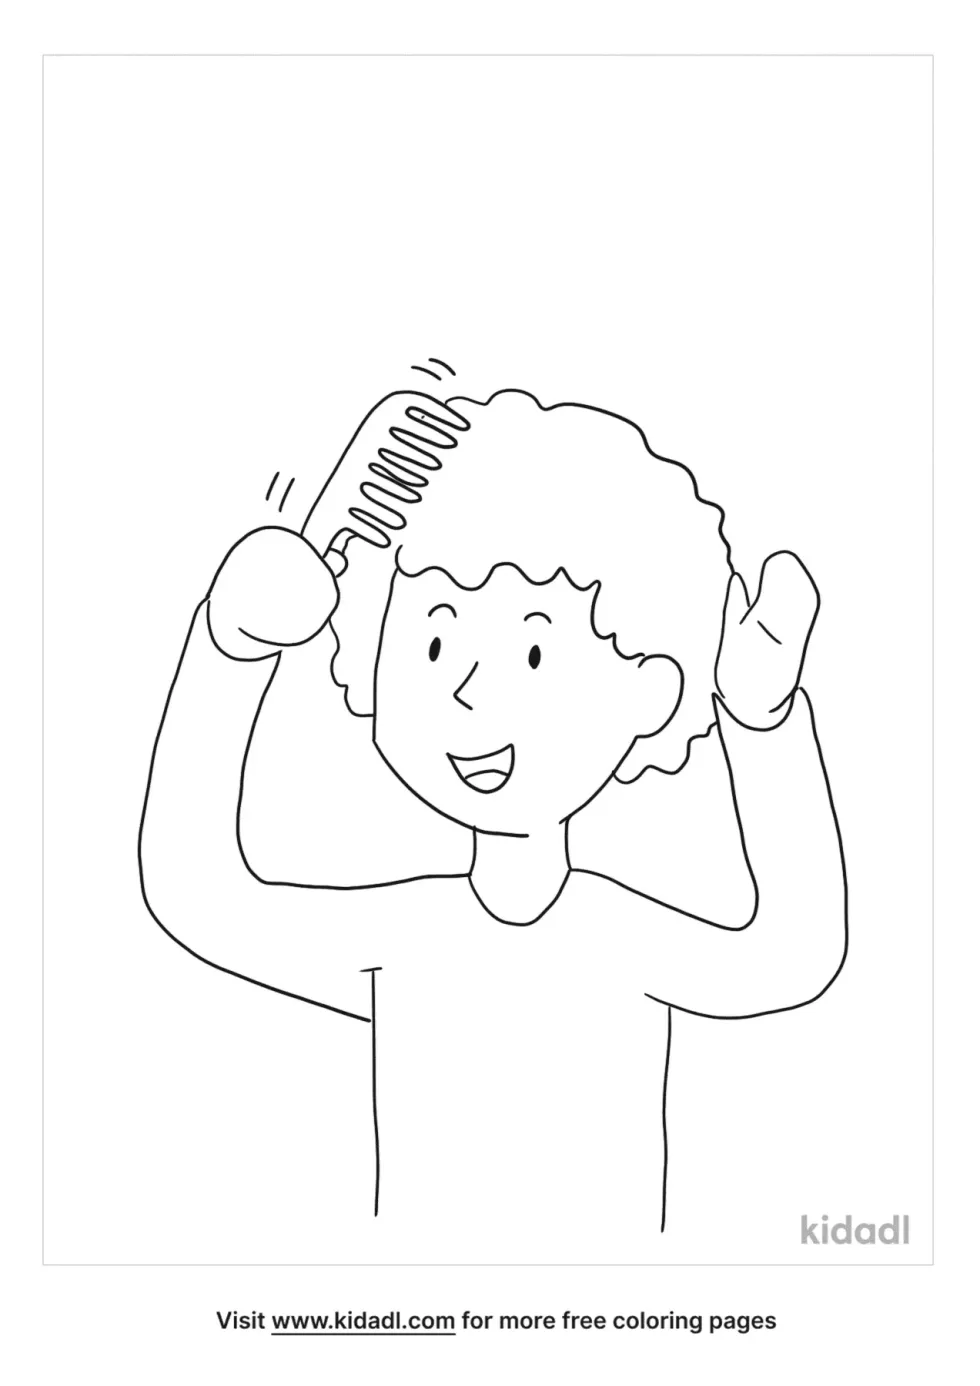 Combing Hair Coloring Page